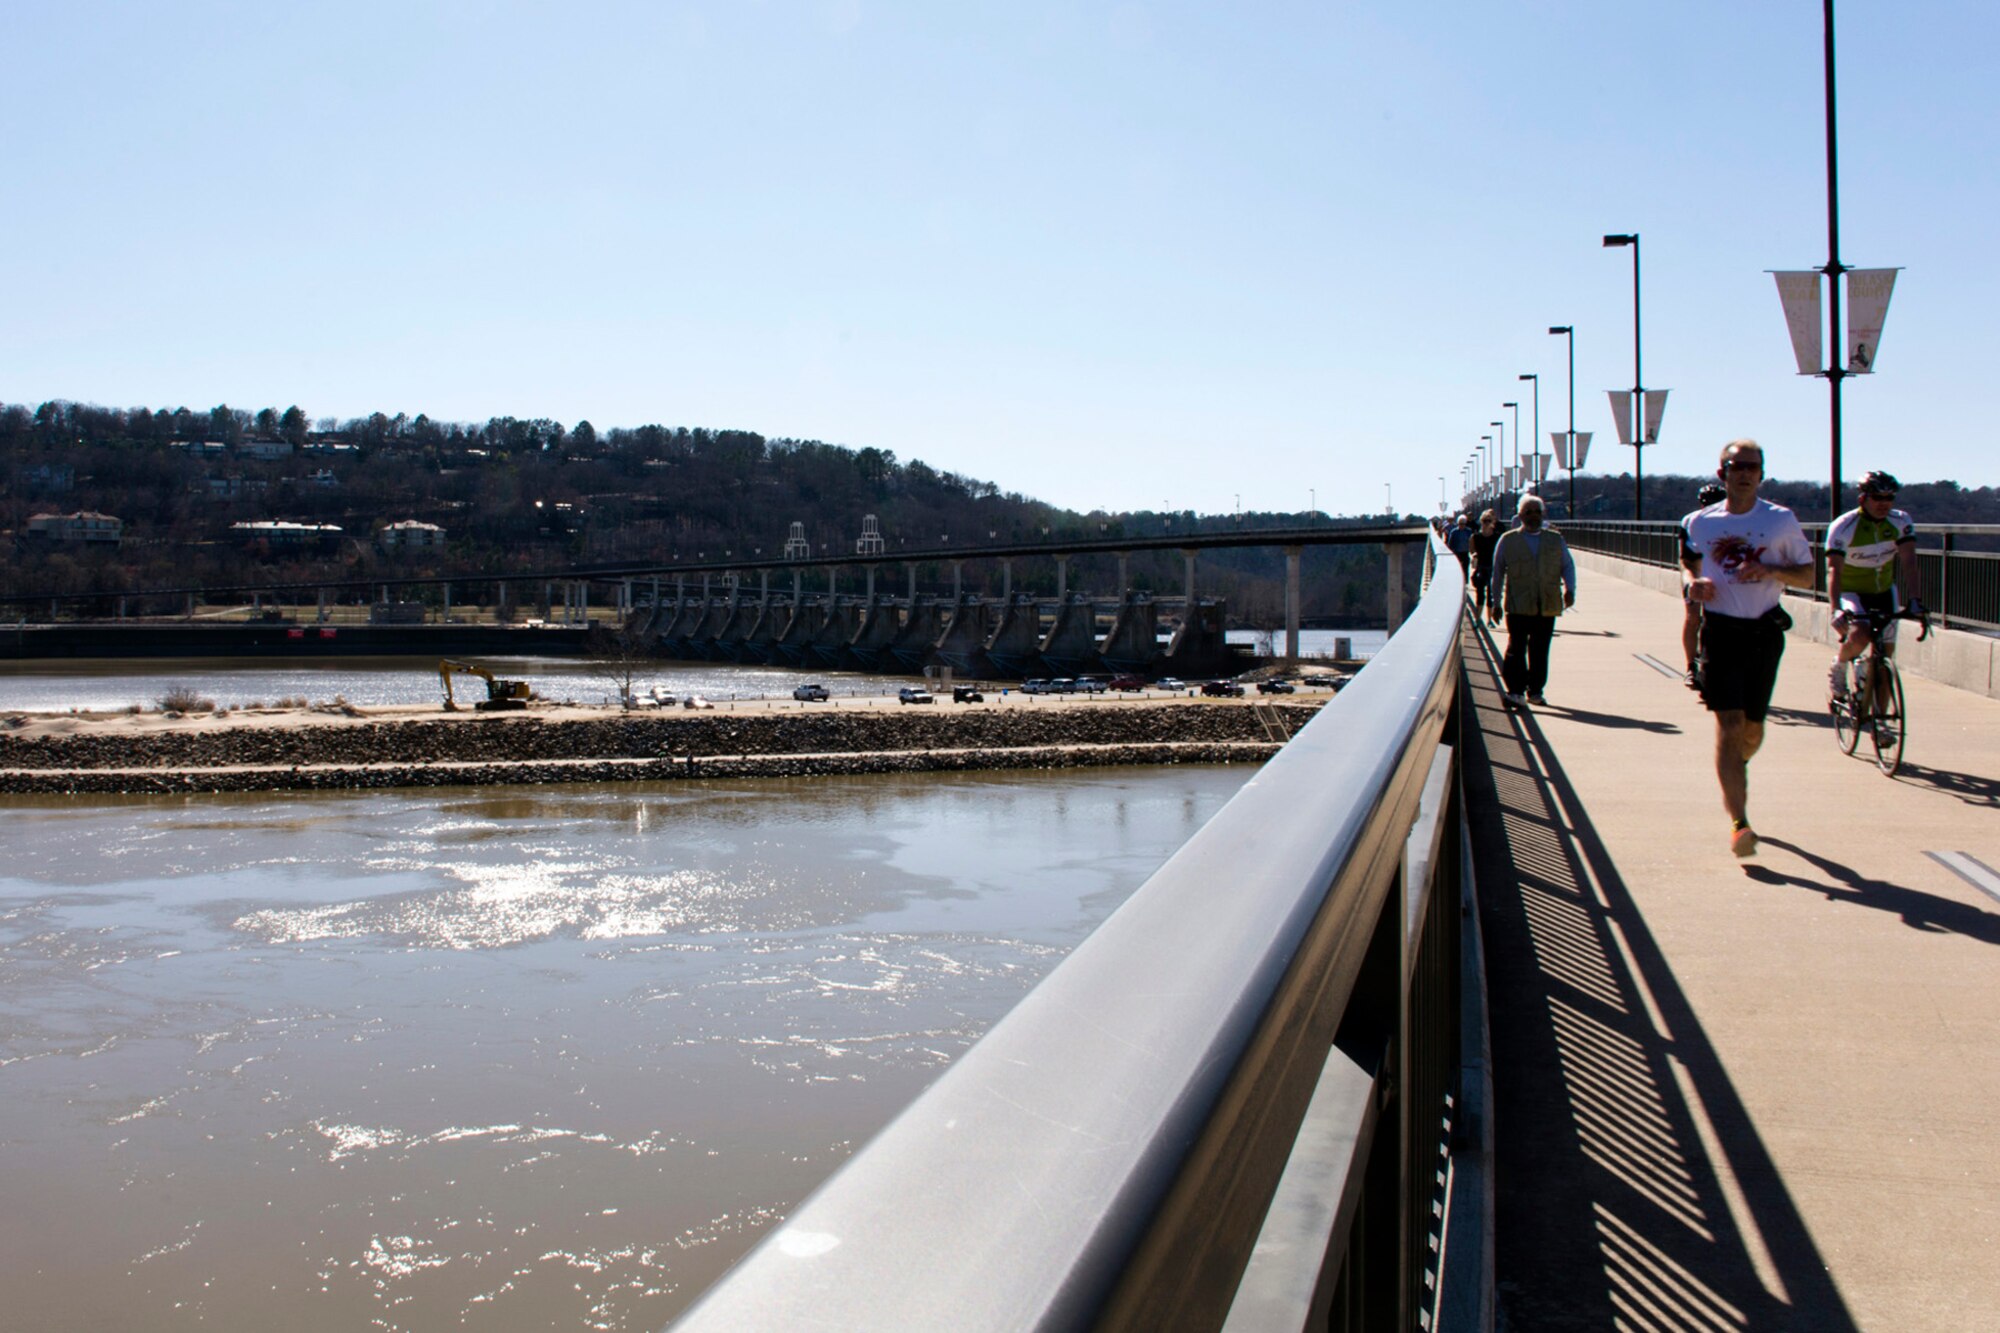 Outdoor enthusiasts in Little Rock, Ark., enjoy the longest purpose-built pedestrian/bicycle bridge in the world Feb. 27, 2016. The bridge, which opened to the public Sept. 30, 2006, rises 90 feet above the river and 30 feet over the dam. The bridge deck is 14 feet wide for two-way traffic, and includes 4,226 lineal feet of bridge and ramps, spanning approximately 3,462 feet of the Arkansas River. (Courtesy photo by Jeff Walston)